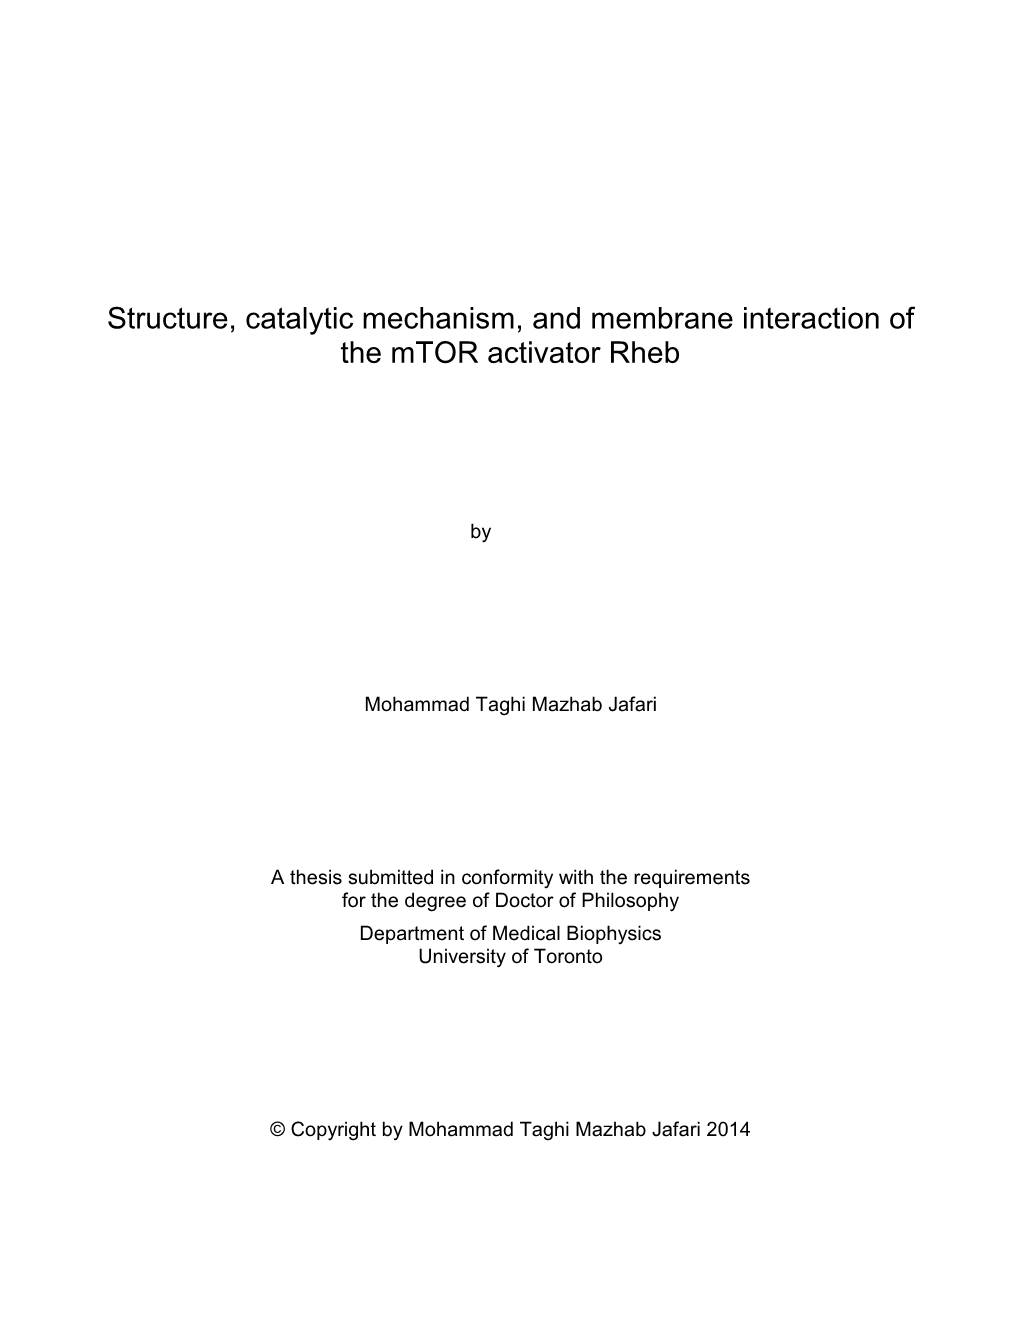 Structure, Catalytic Mechanism, and Membrane Interaction of the Mtor Activator Rheb